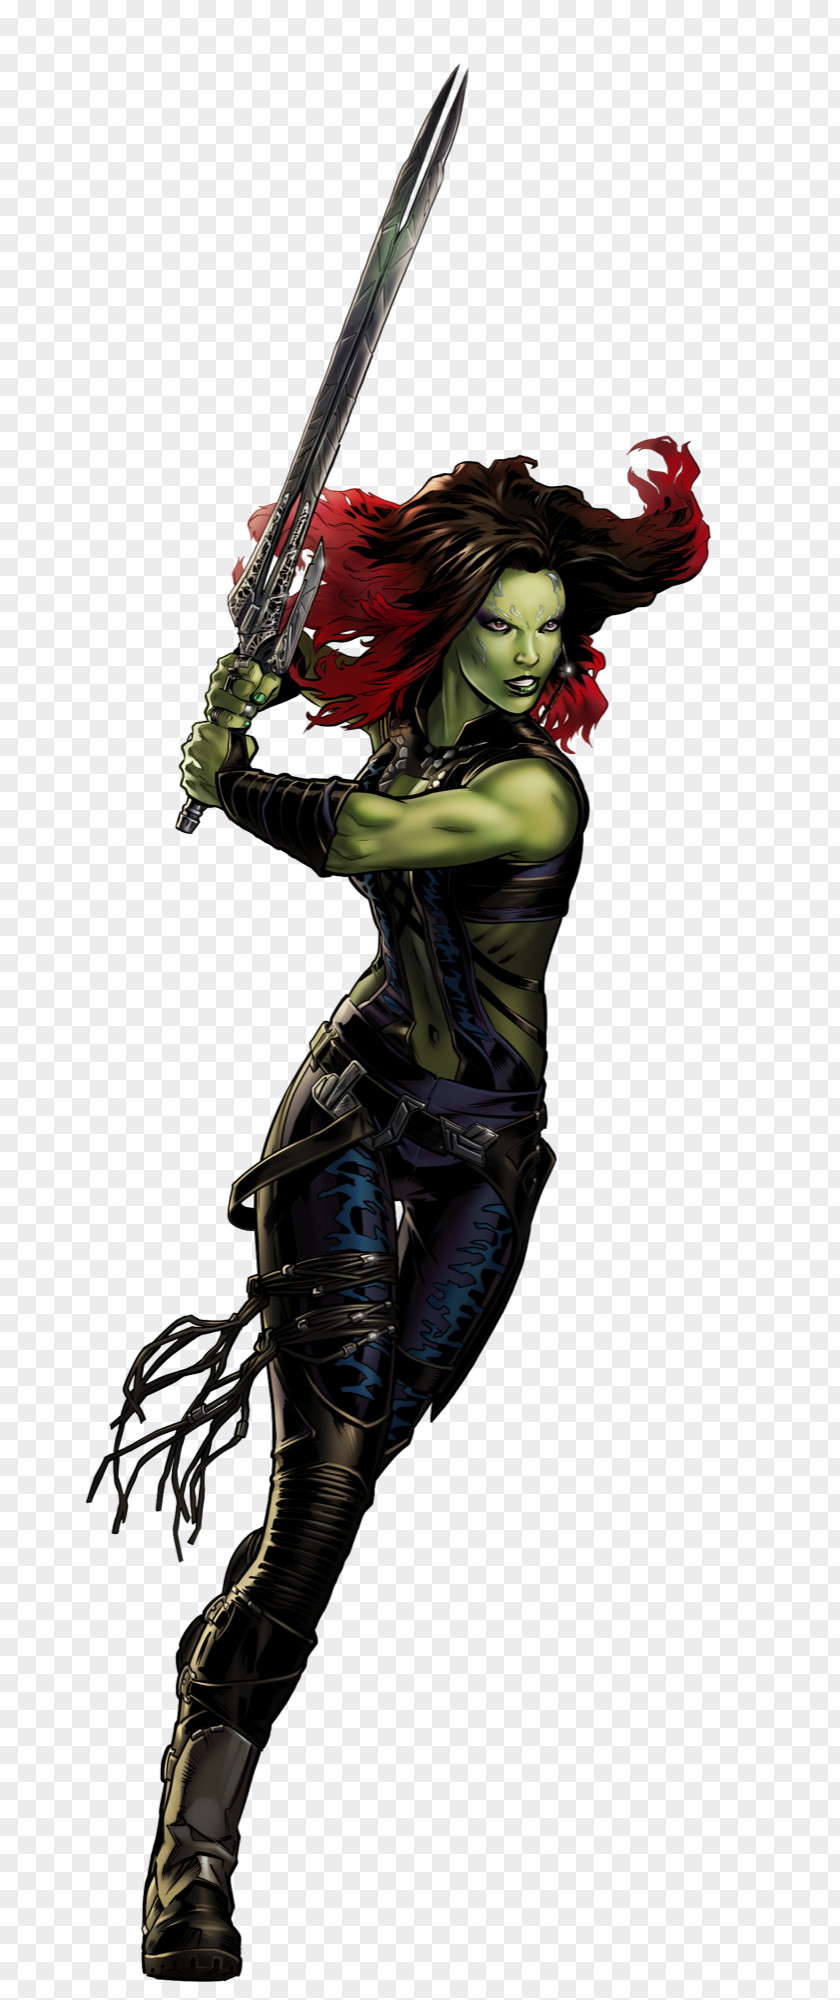 Guardians Of The Galaxy Marvel: Avengers Alliance Black Widow Gamora Thanos PNG